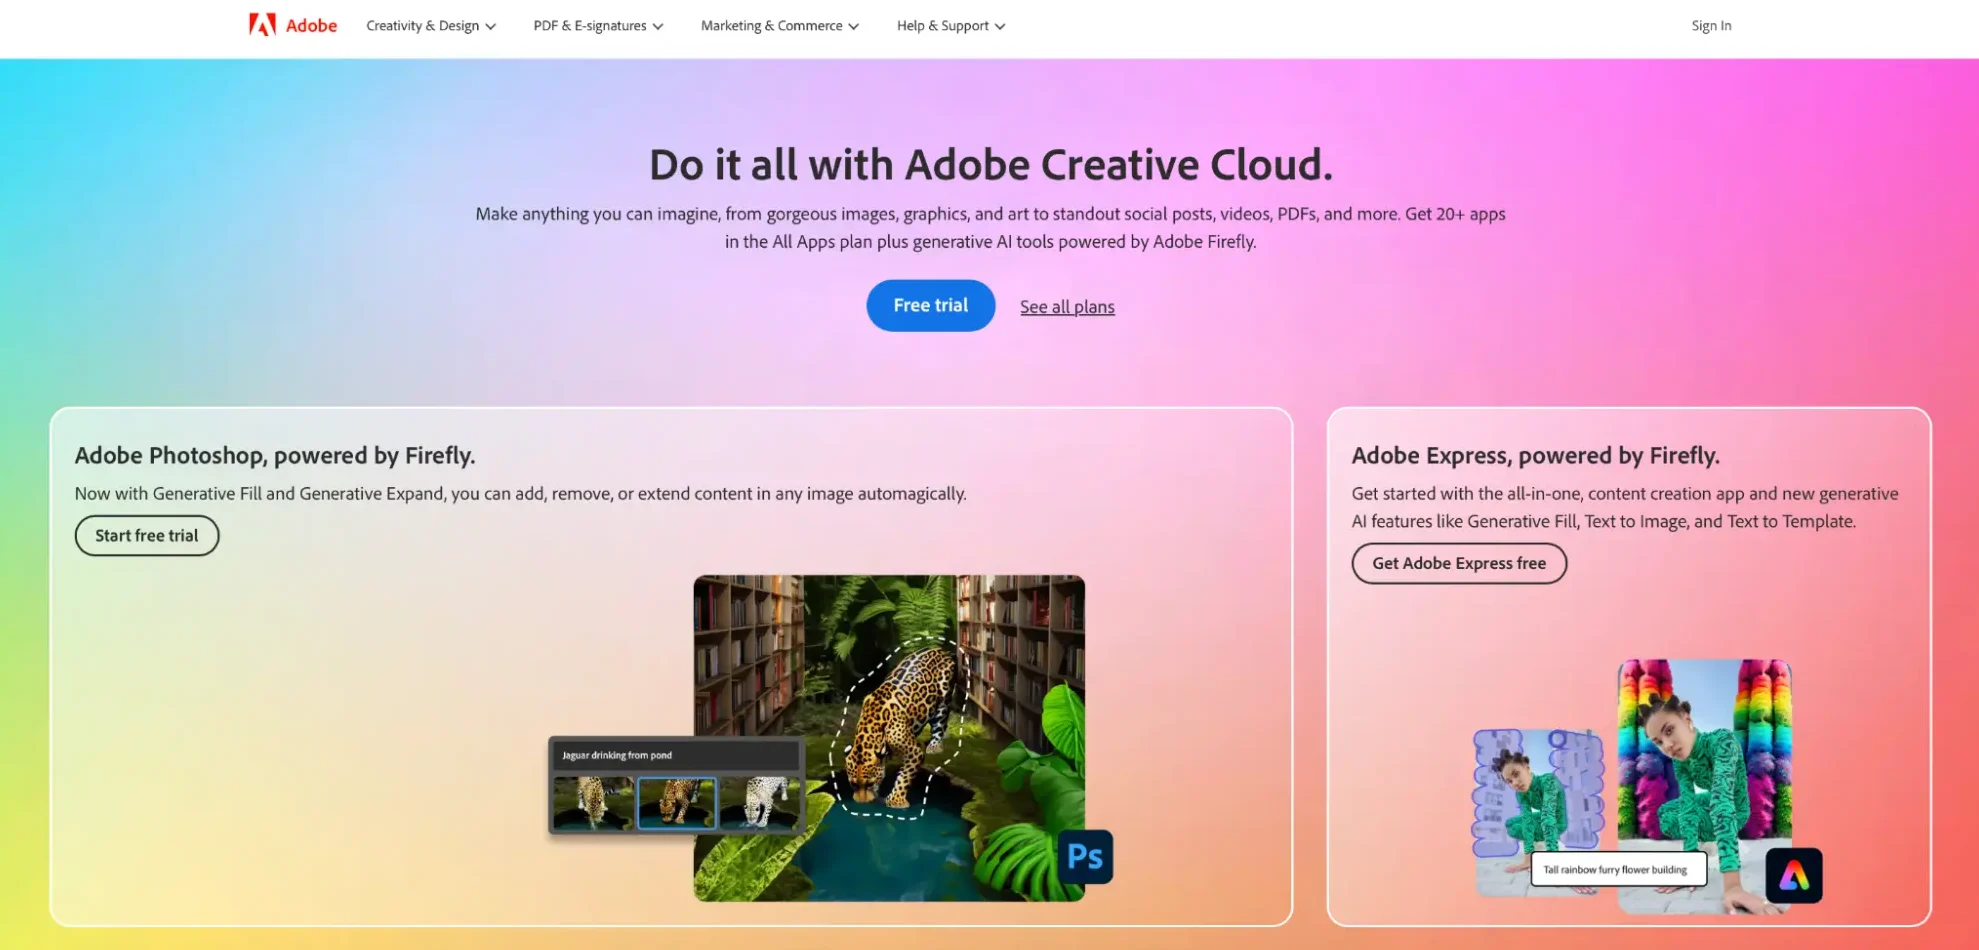 This image shows Adobe home page.